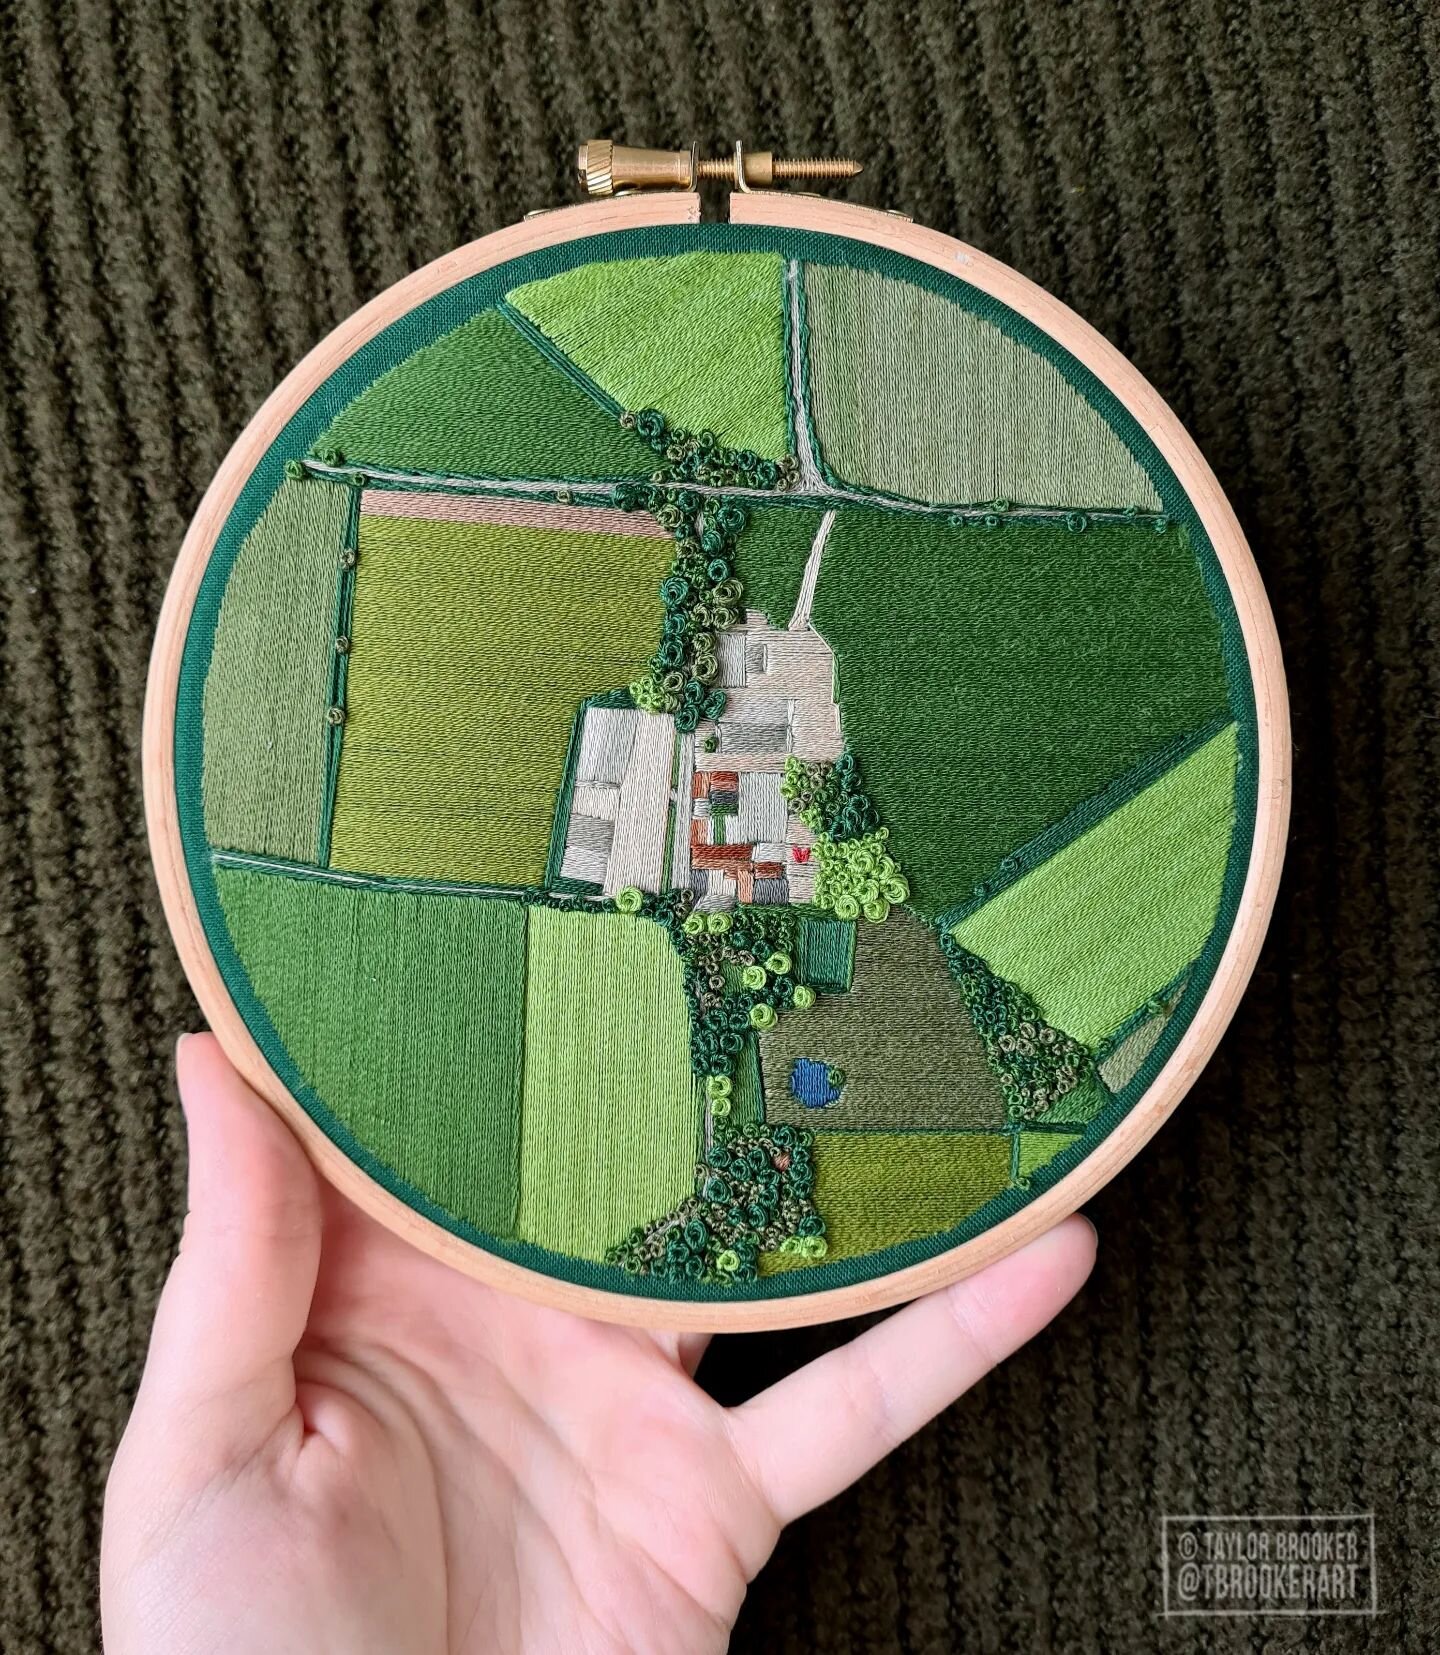 An embroidered wedding venue commission from last year 🌱💒 Commission info is on my website if you'd like something similar! www.tbrookerart.co.uk 
.
.
#aeriallandscapeembroidery #aerialembroidery #embroidery #landscape #wedding #weddinginspiration 